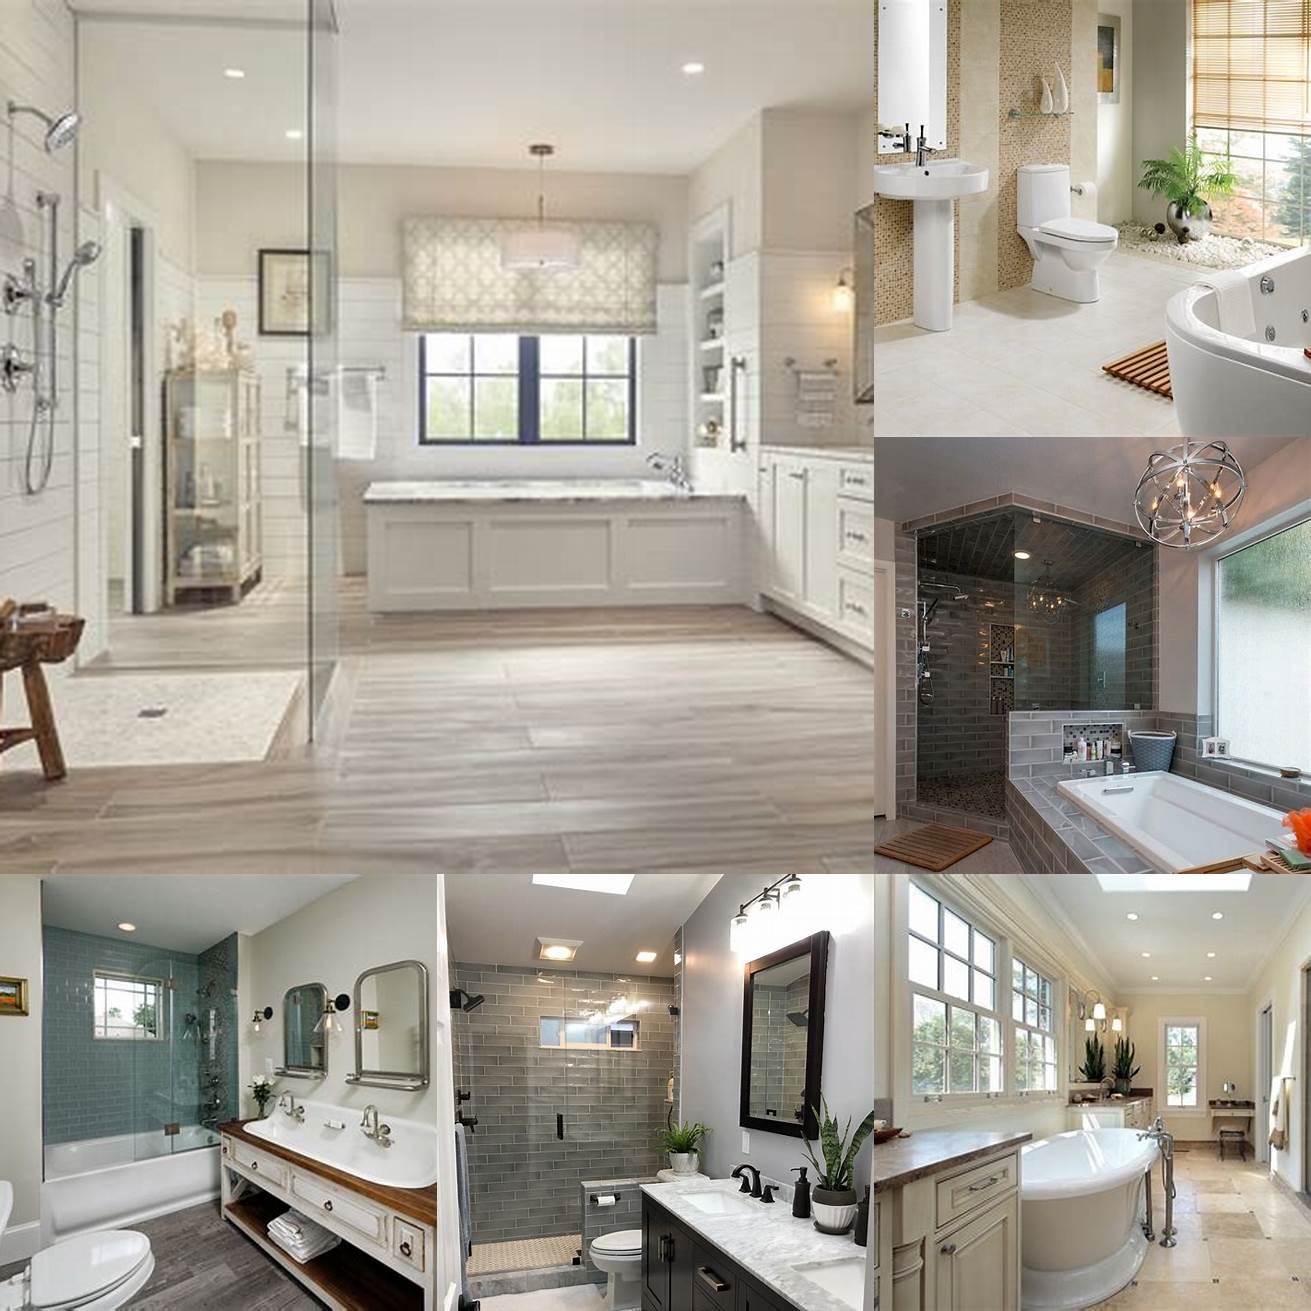 Style of your bathroom